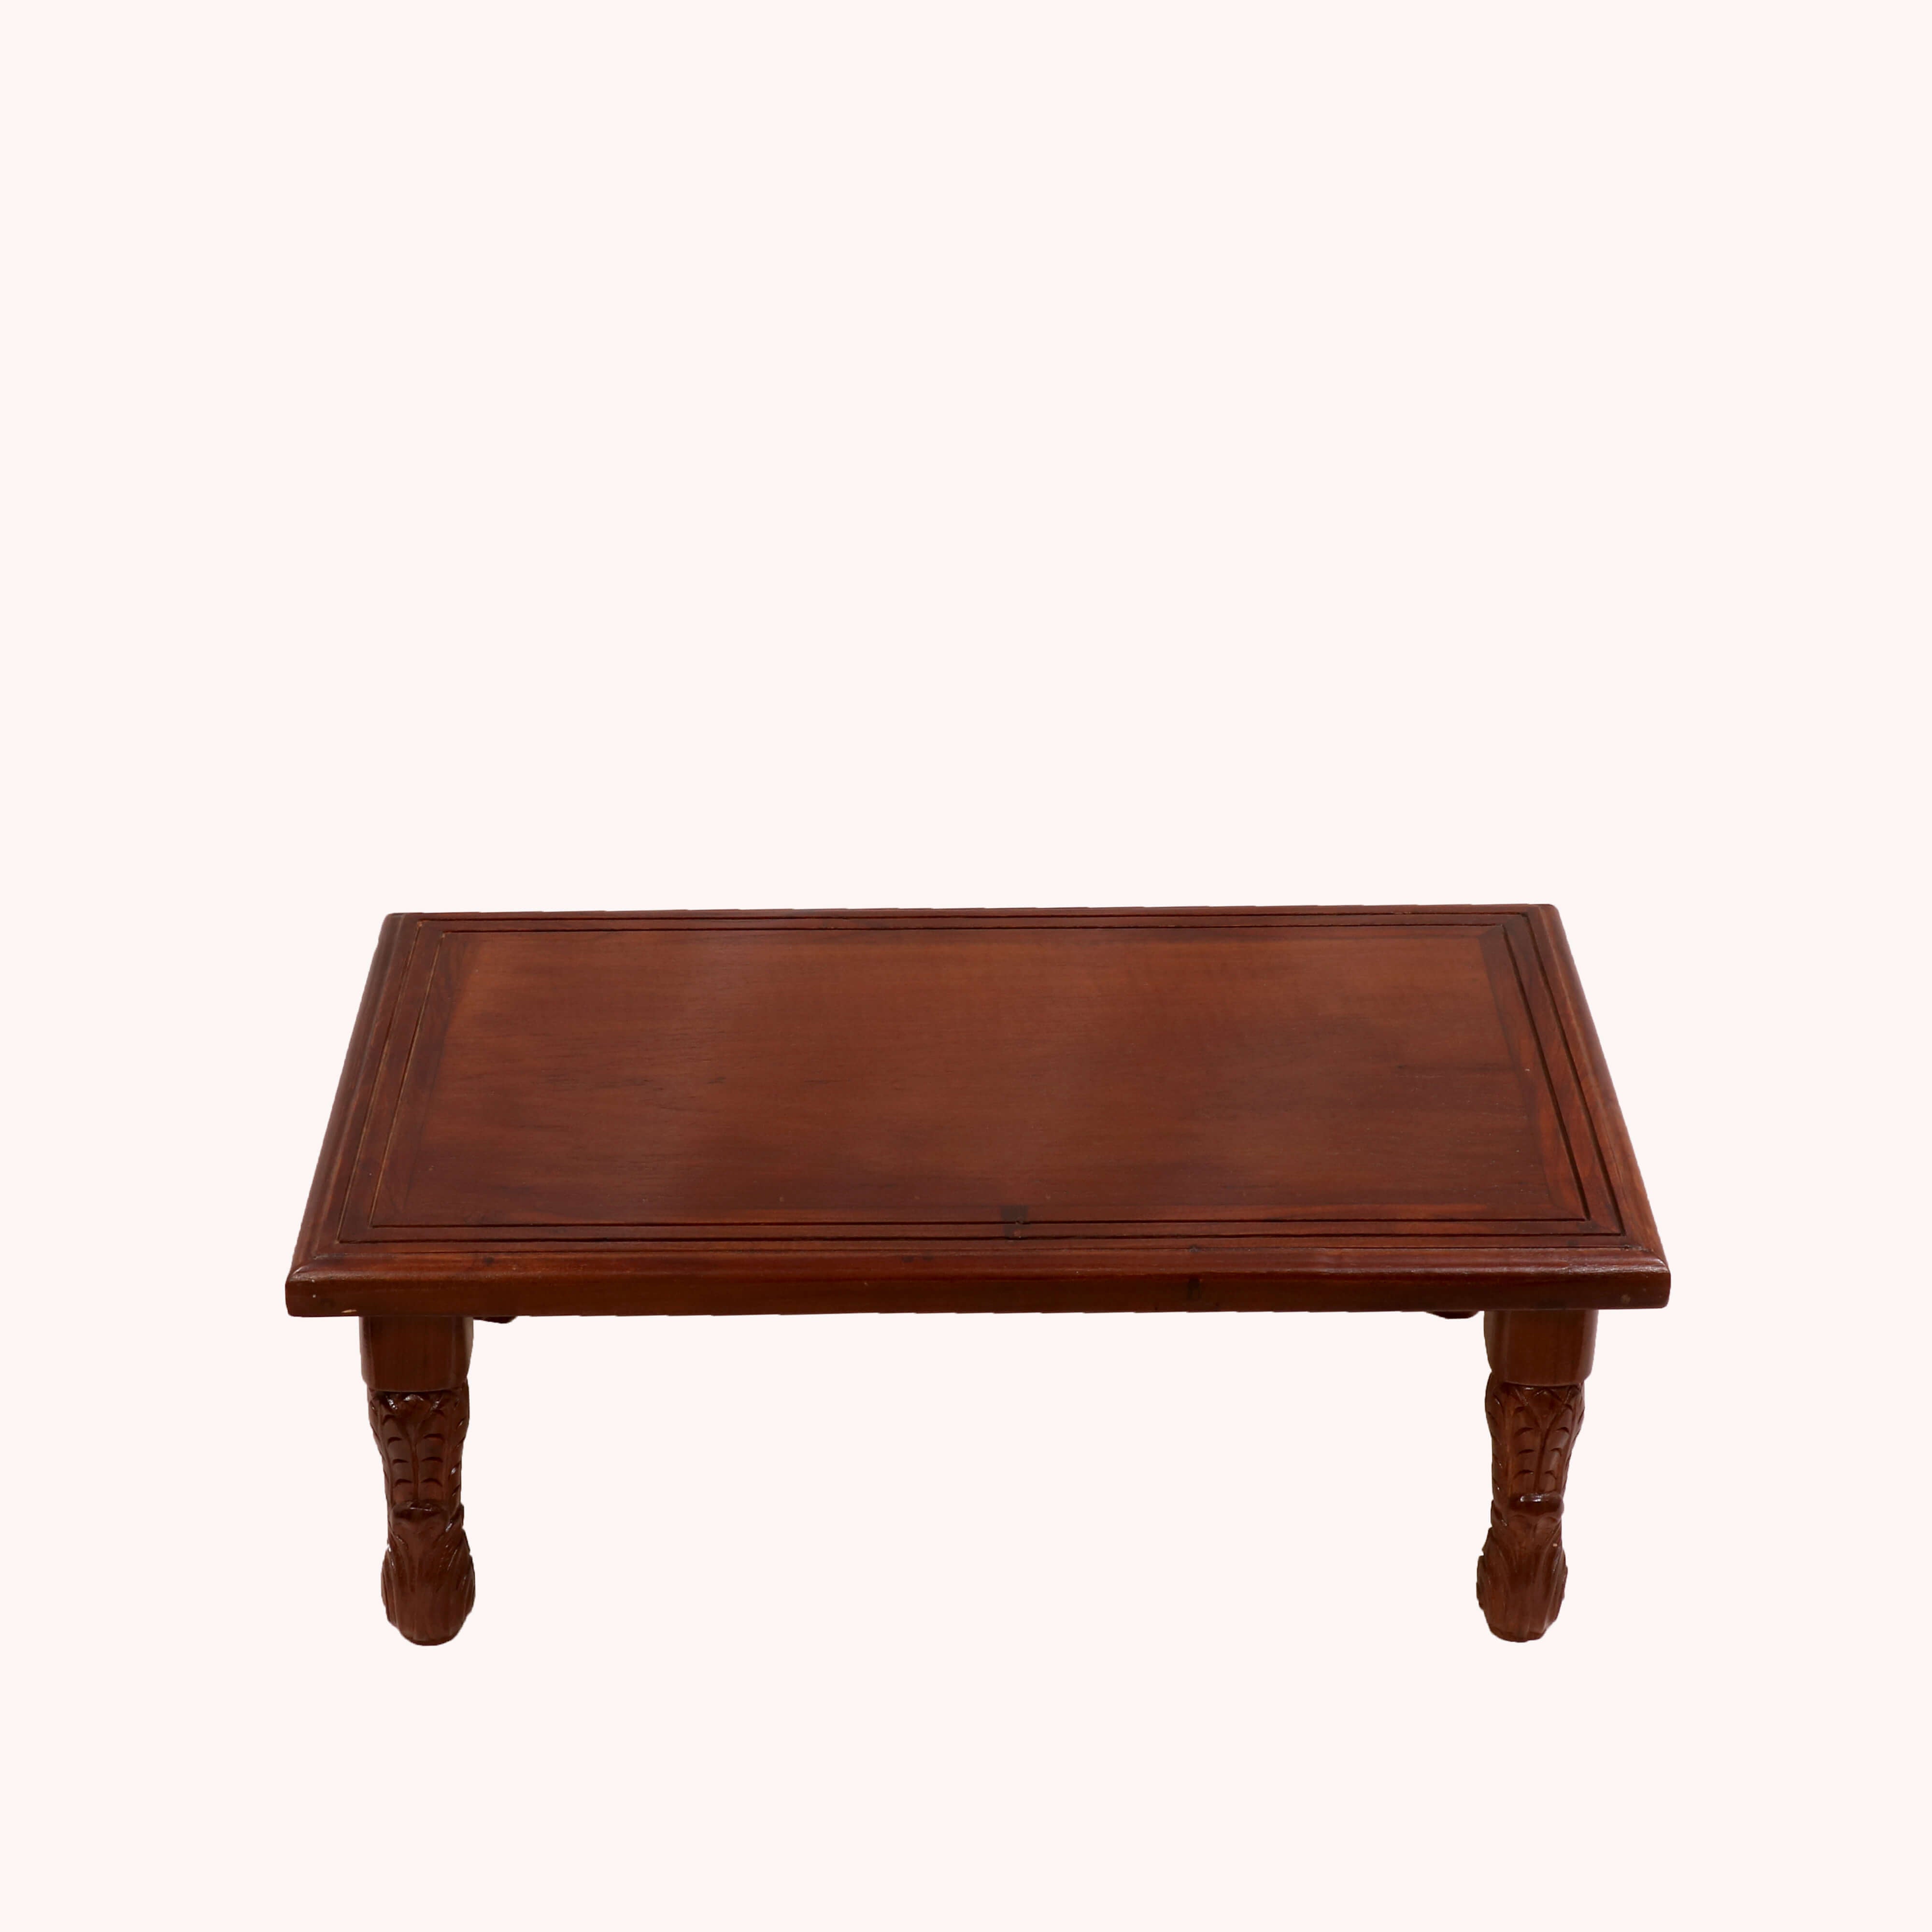 Brown Tone Carved Legs Wooden Folding Table Default Title Bajot